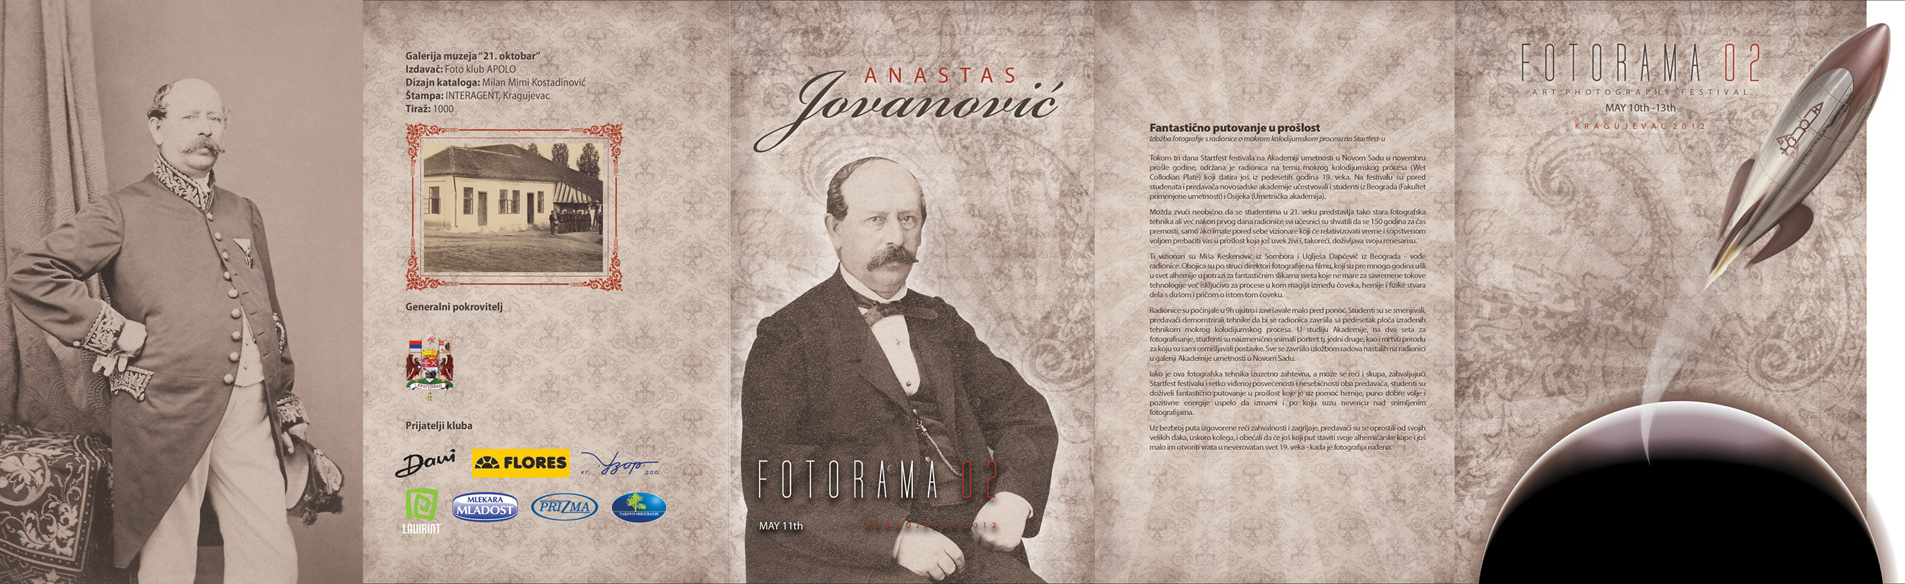 Opening of photo exhibition of old photographs from Kragujevac (19th and early 20th century), Anastas Jovanović